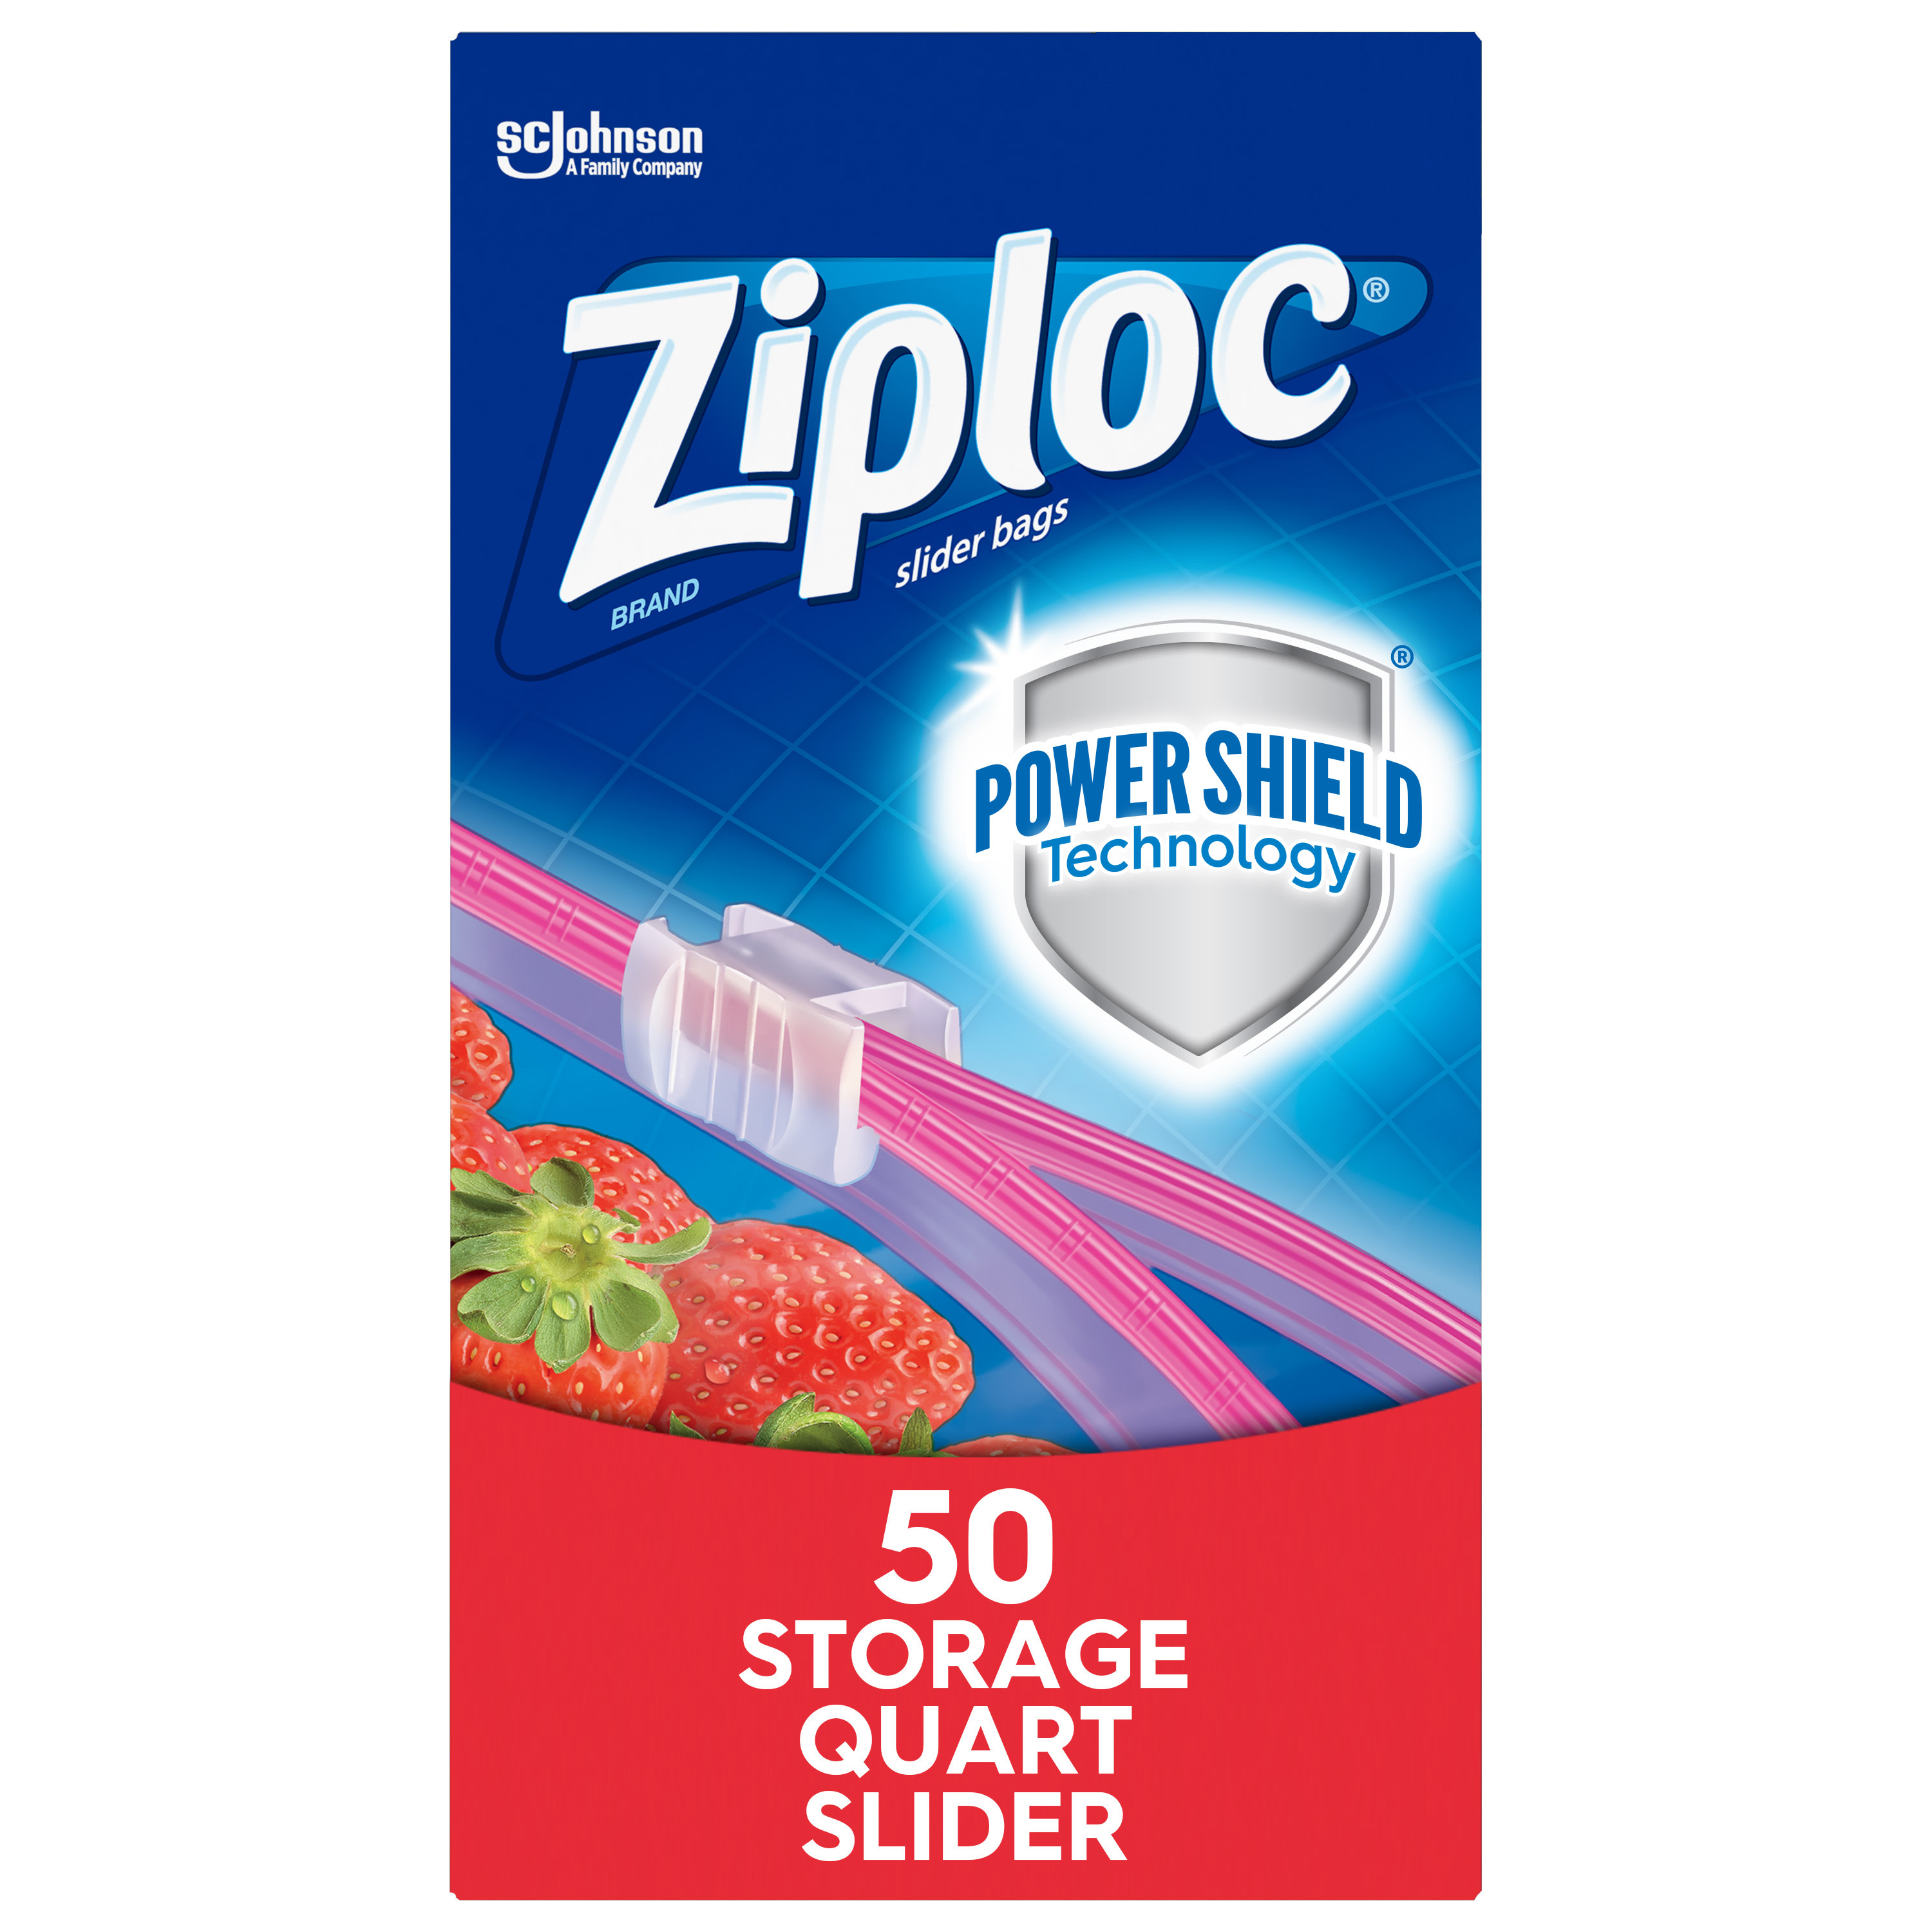 Ziploc® Brand Slider Quart Storage Bags with Power Shield Technology, 50 Count - image 1 of 17